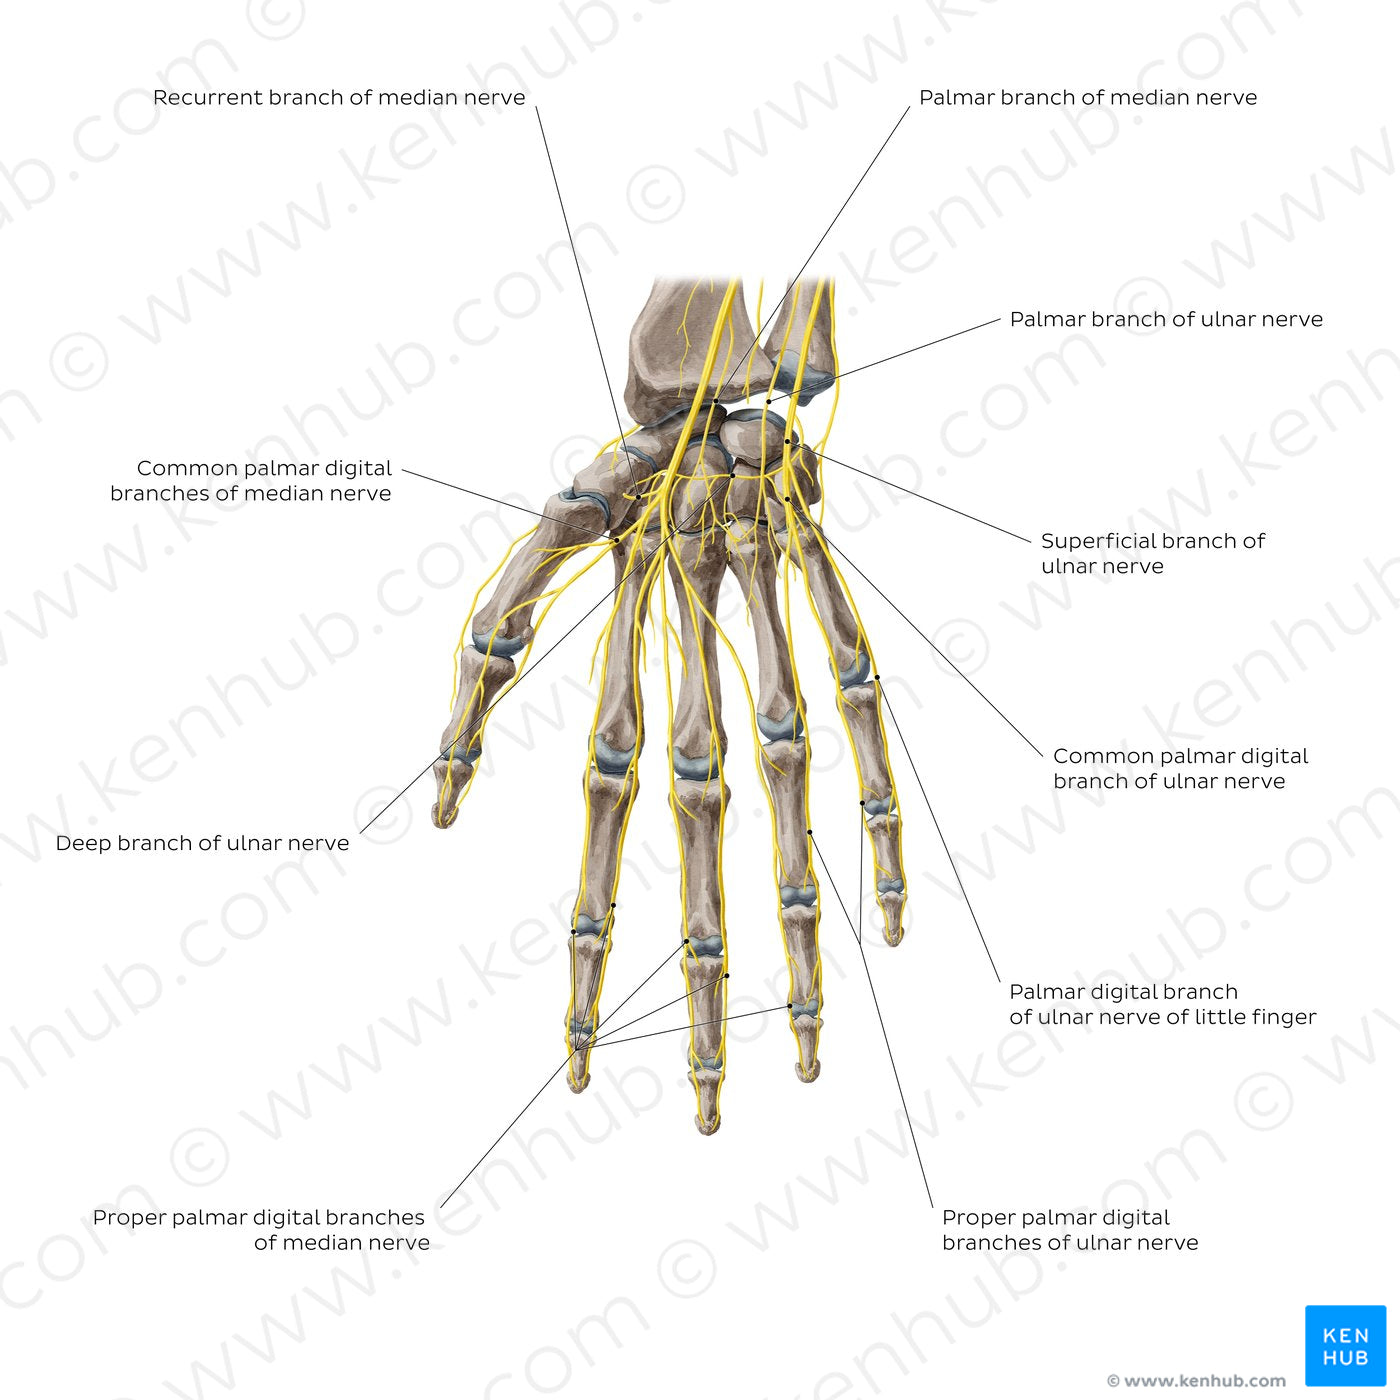 Nerves of the hand: Palmar view (English)